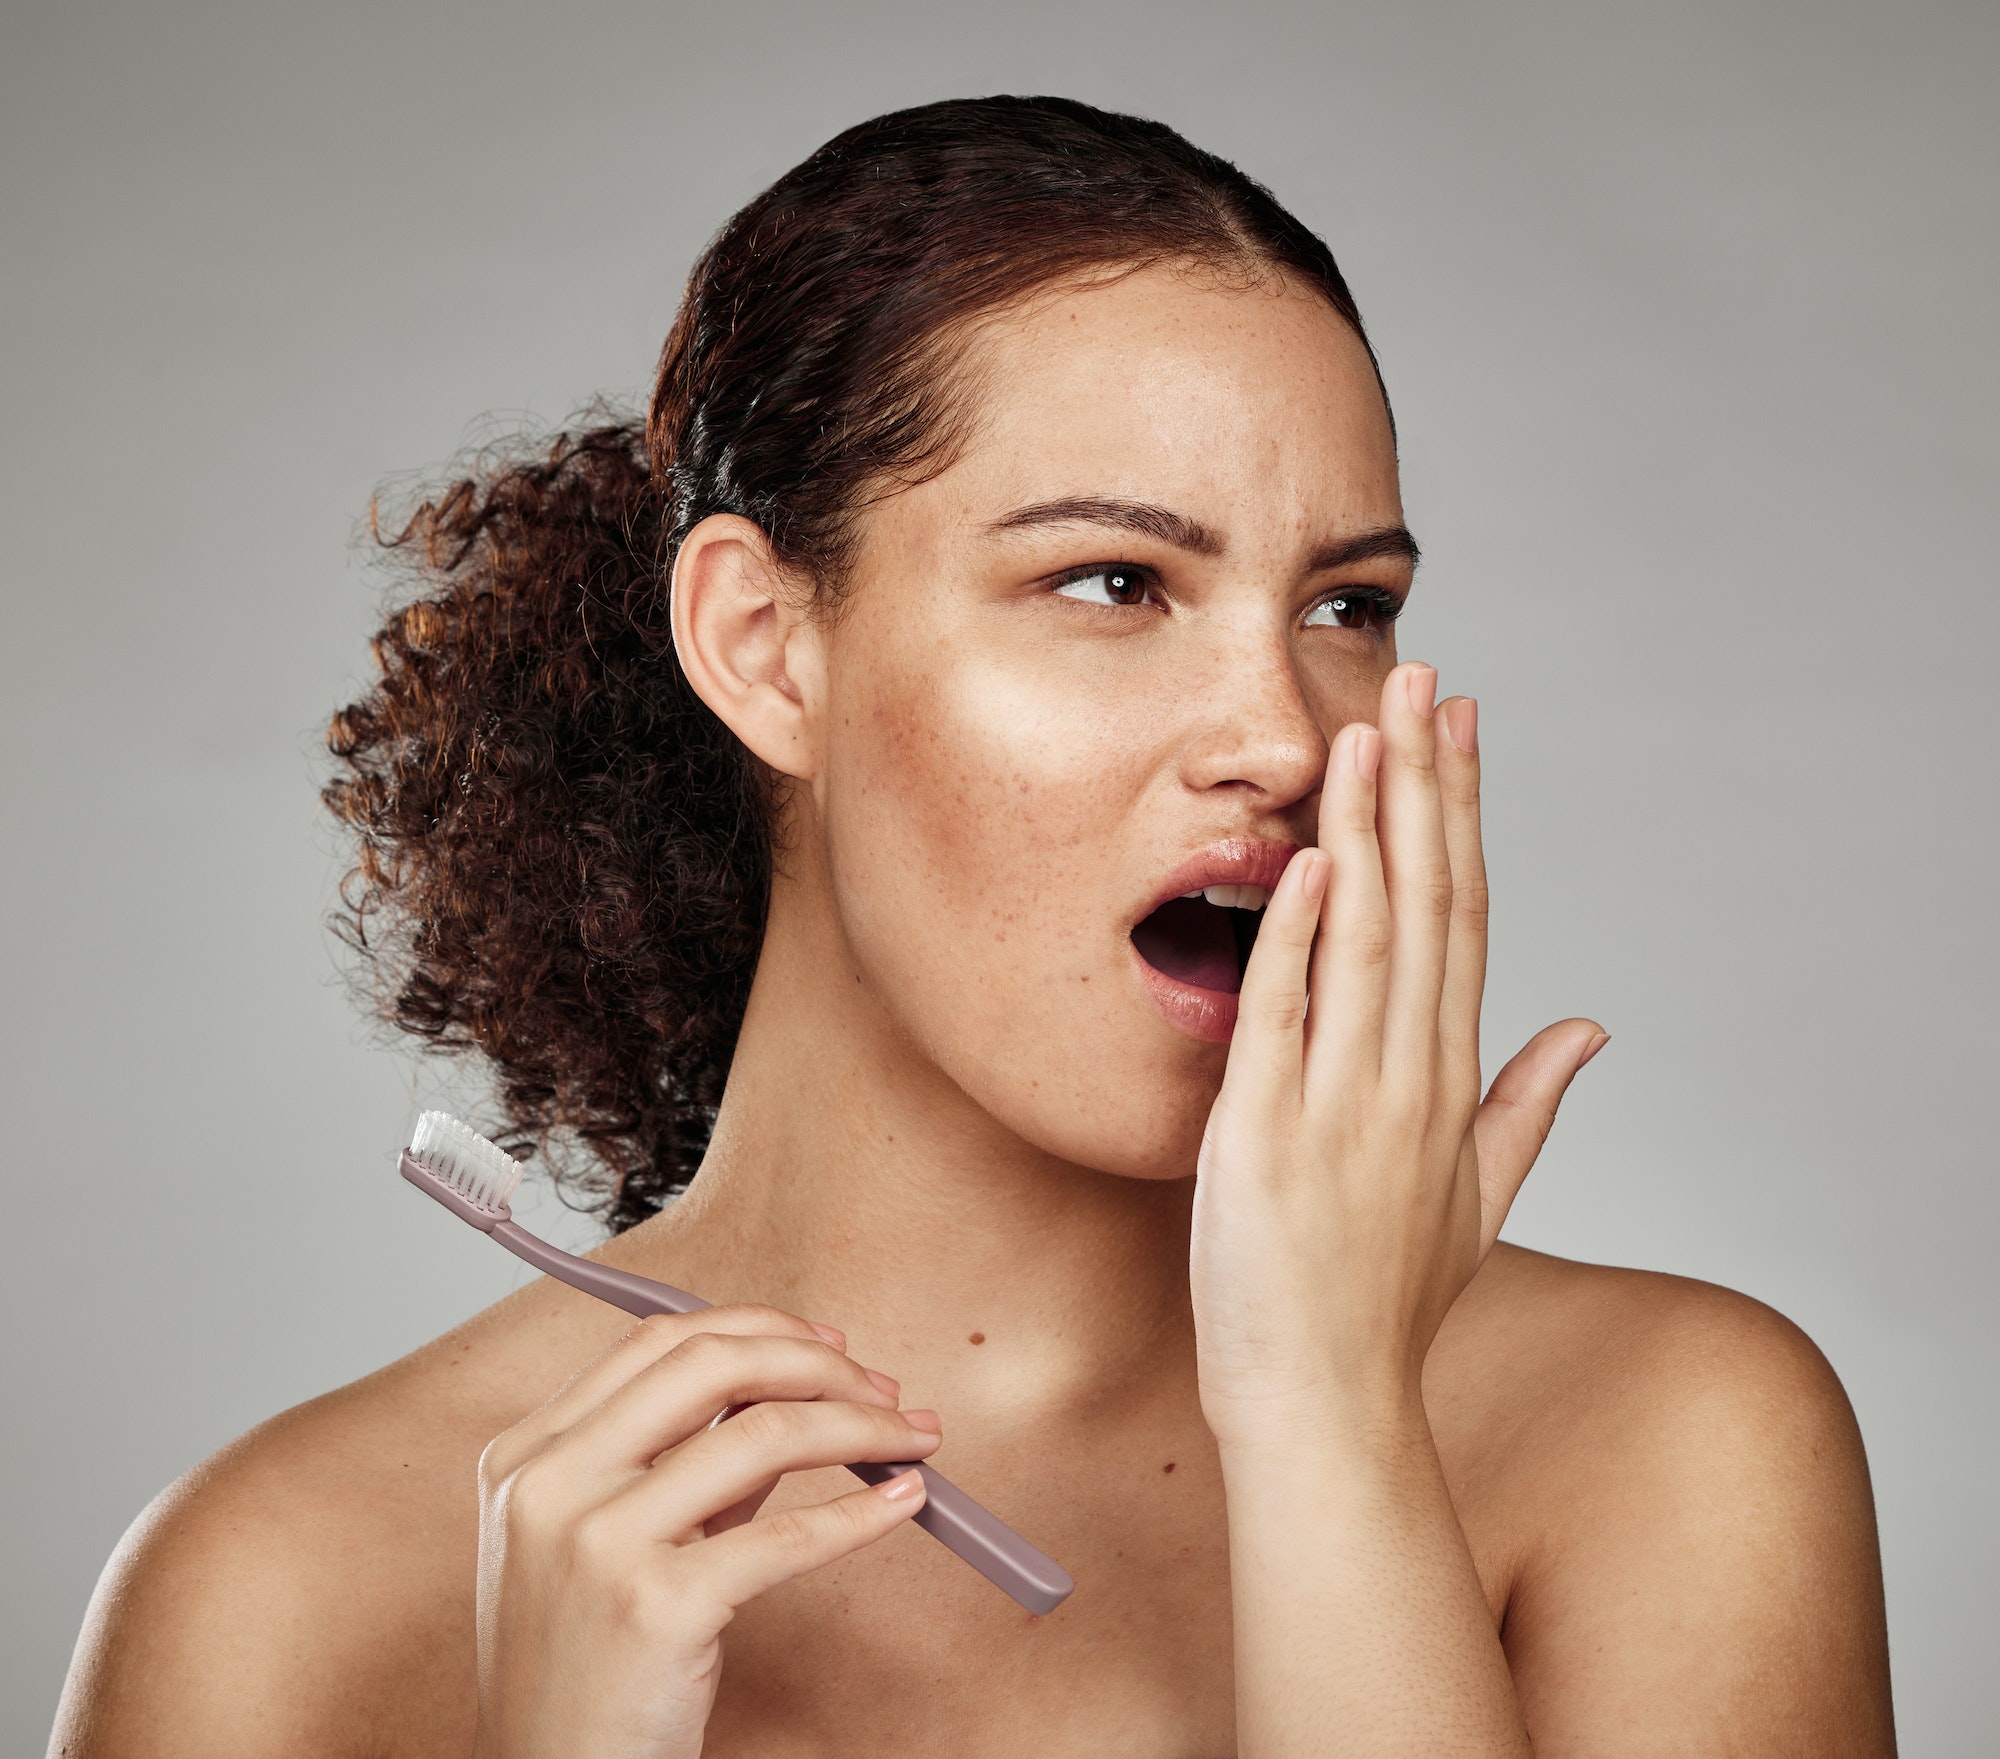 Toothbrush, woman and bad breath with dental problem while smelling odor of mouth, teeth or gums in